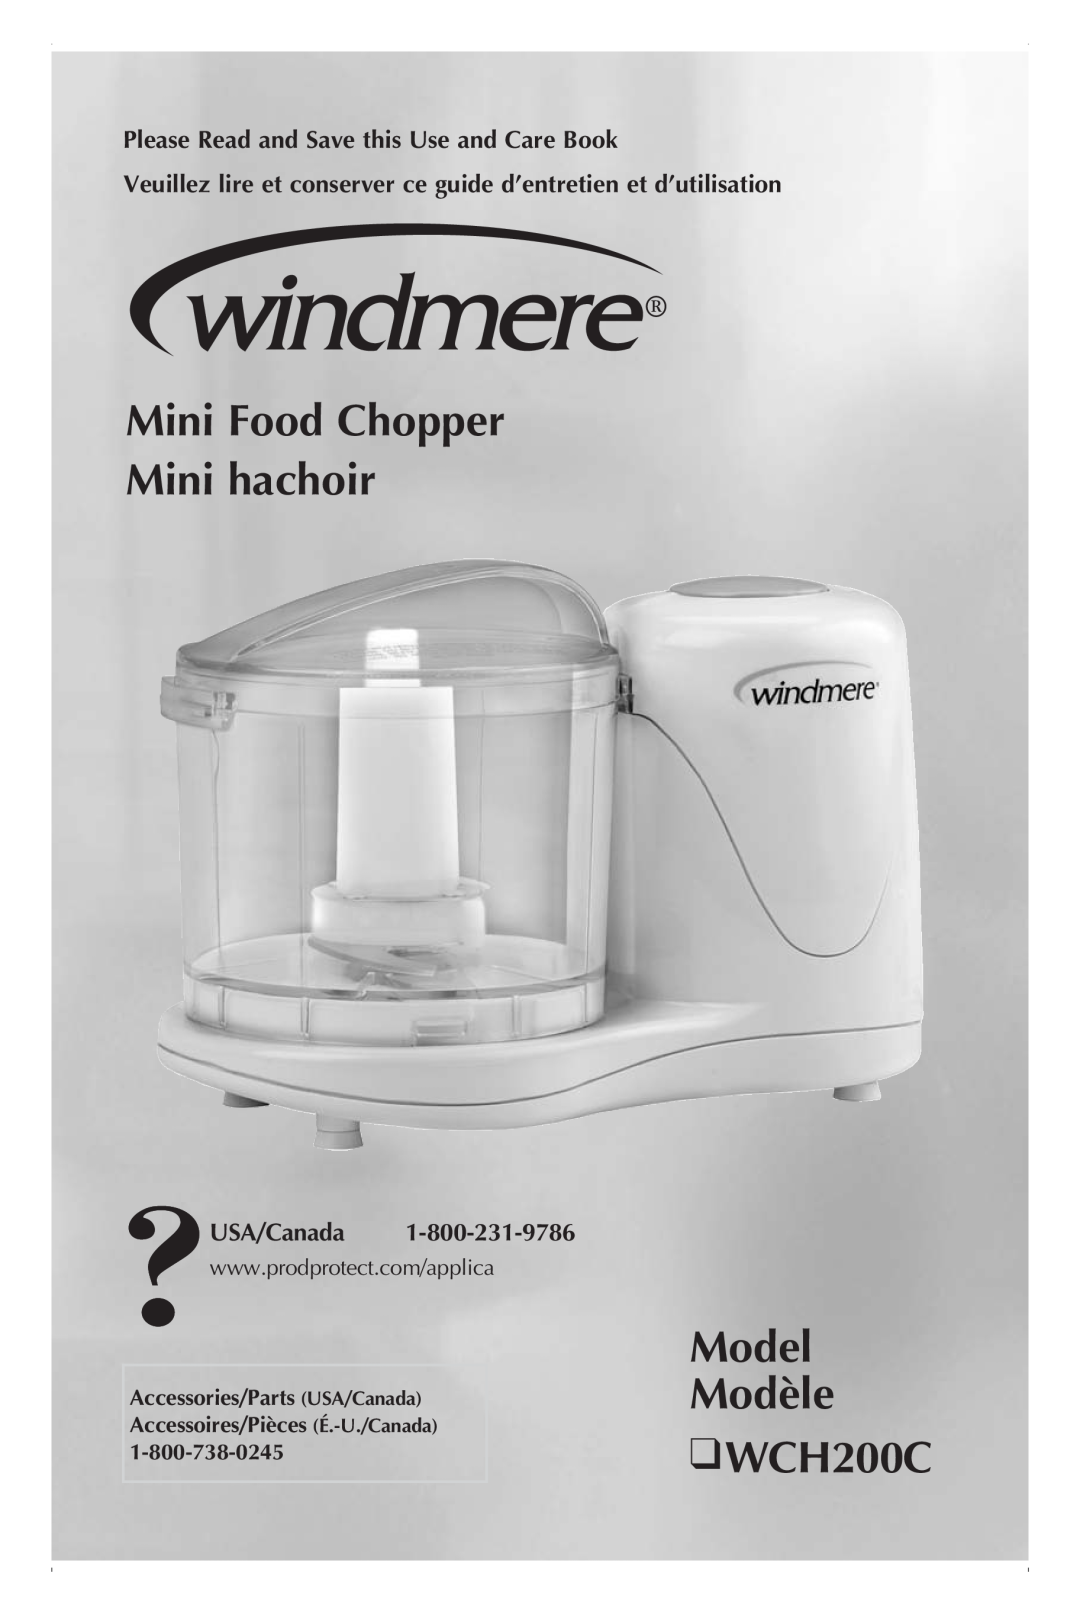 Windmere manual Mini Food Chopper Mini hachoir, Model Modèle WCH200C, Please Read and Save this Use and Care Book 